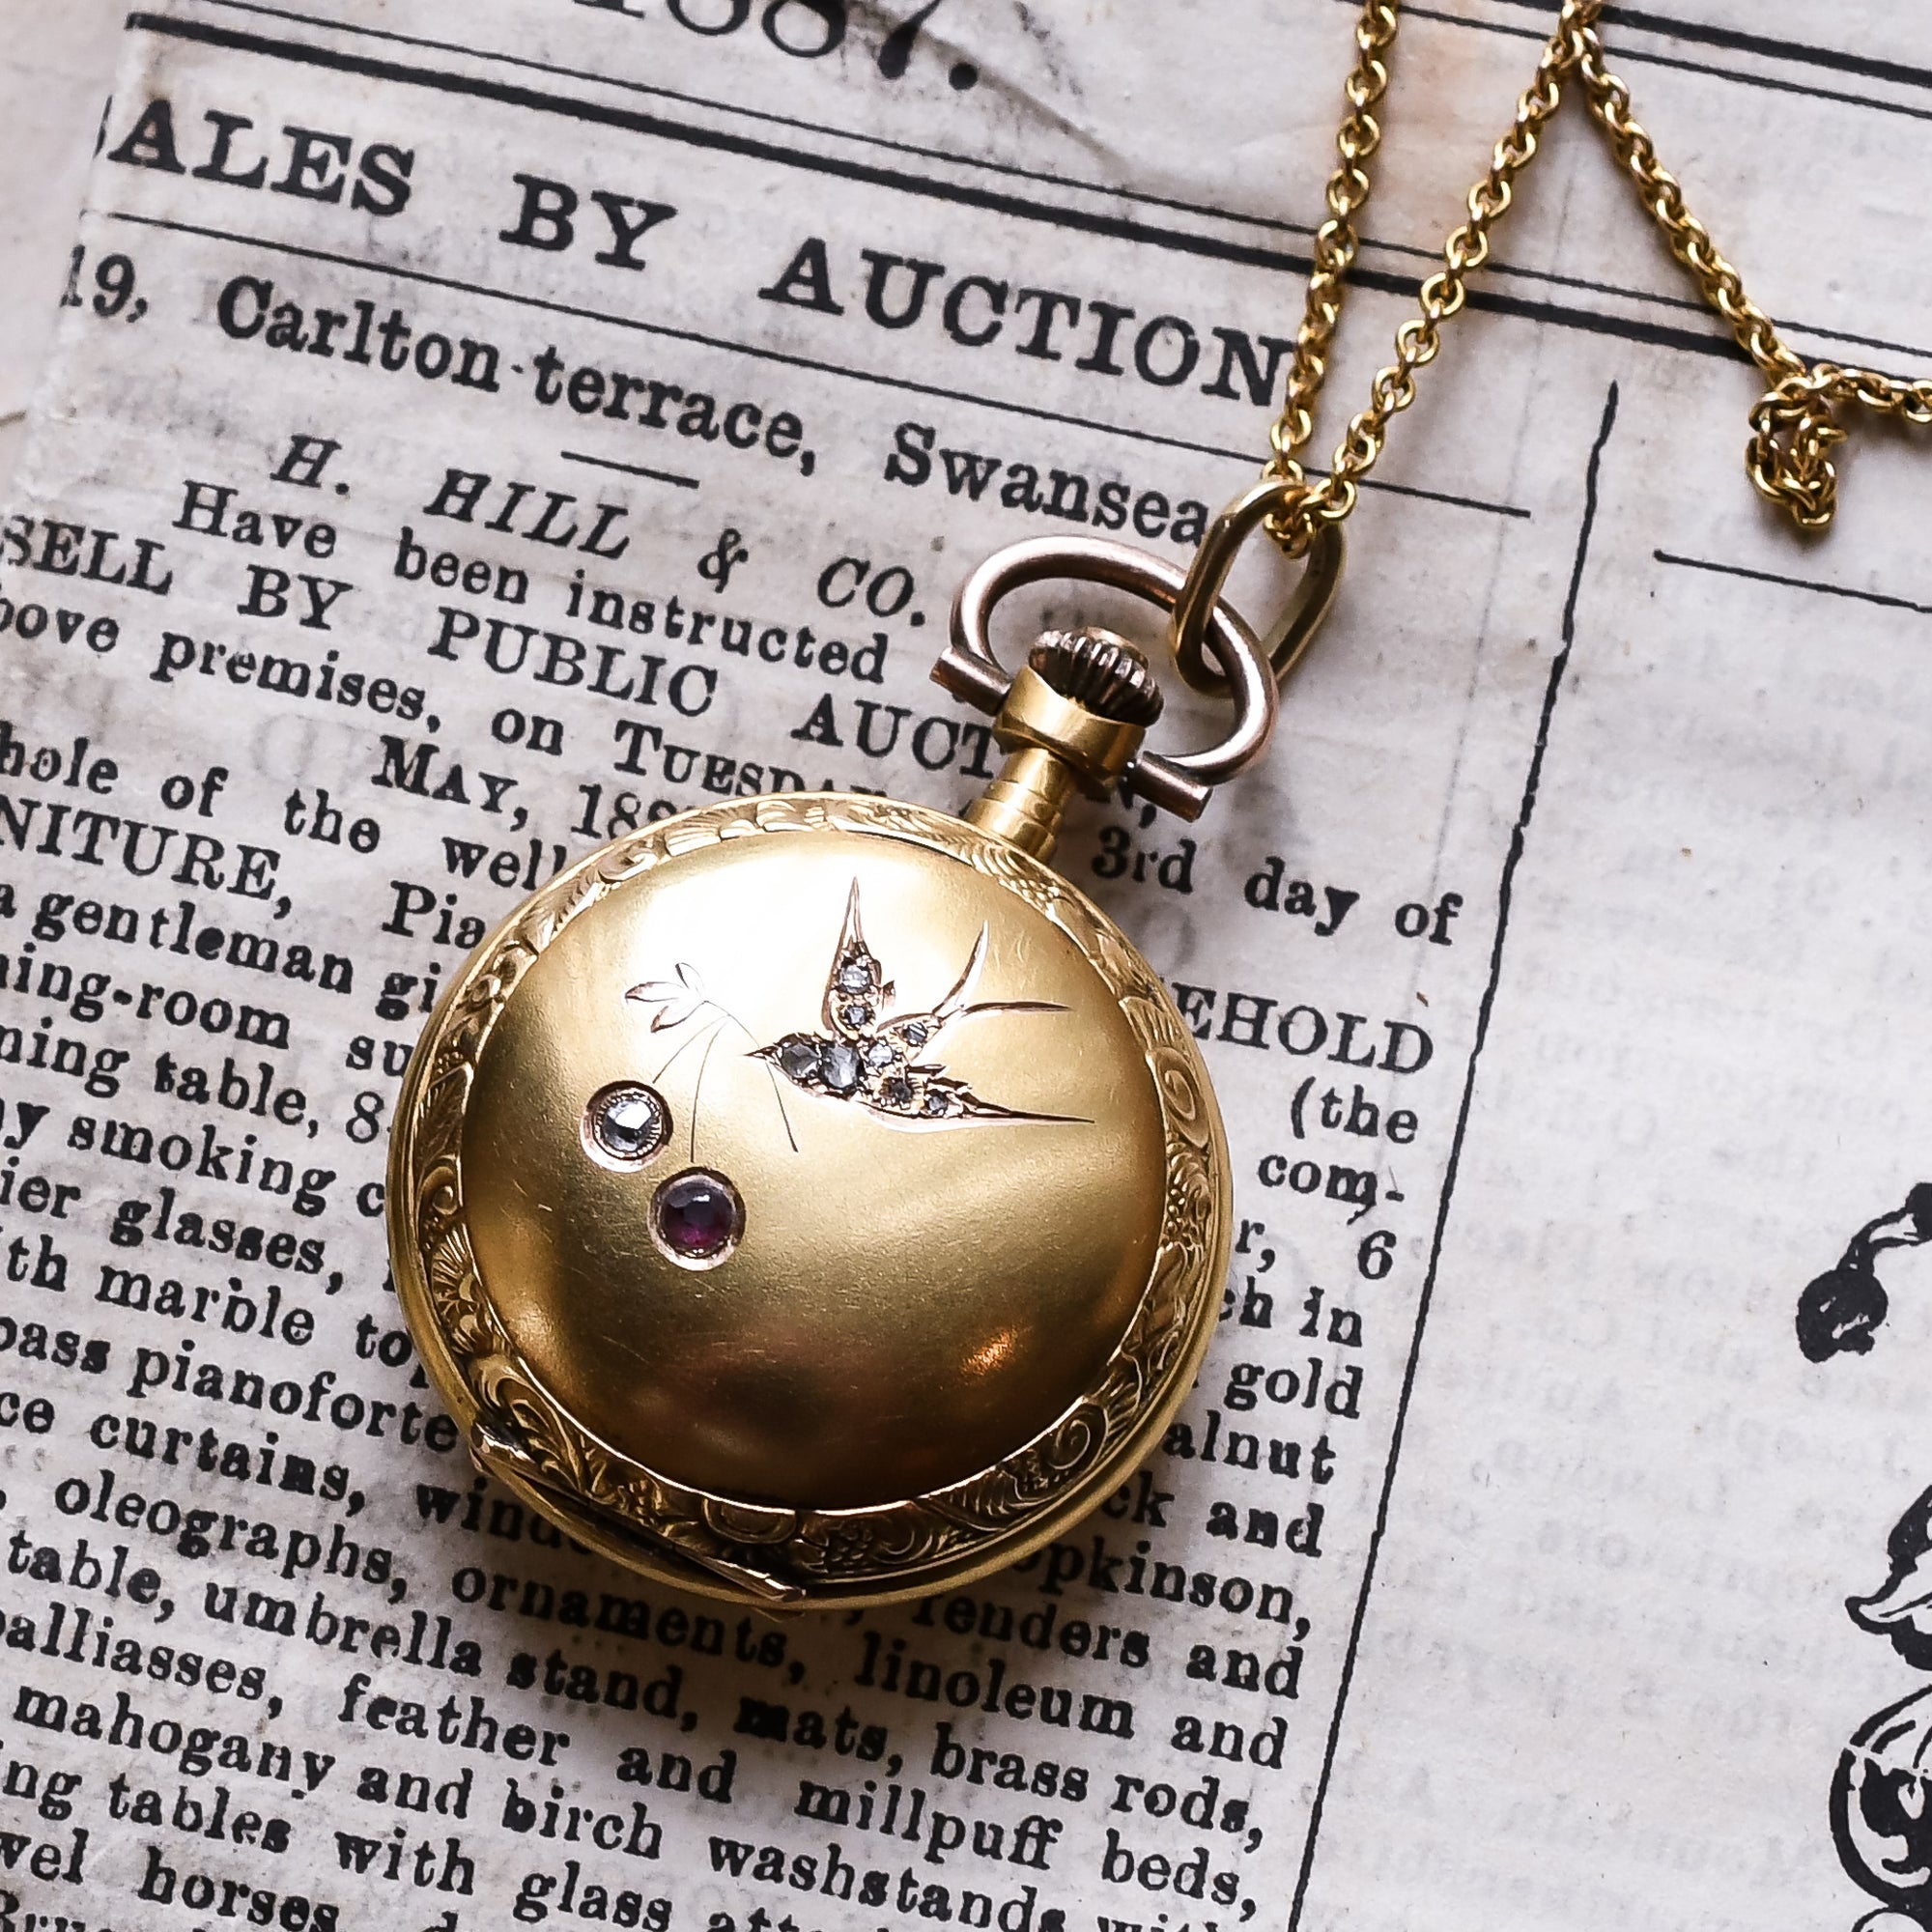 AZYASCO Harry Potter Snitch Ball Pendant Pocket Watch Quartz Analog Mini  Necklace Gift HS-591 Vintage Metal Pocket Watch Chain Price in India - Buy  AZYASCO Harry Potter Snitch Ball Pendant Pocket Watch